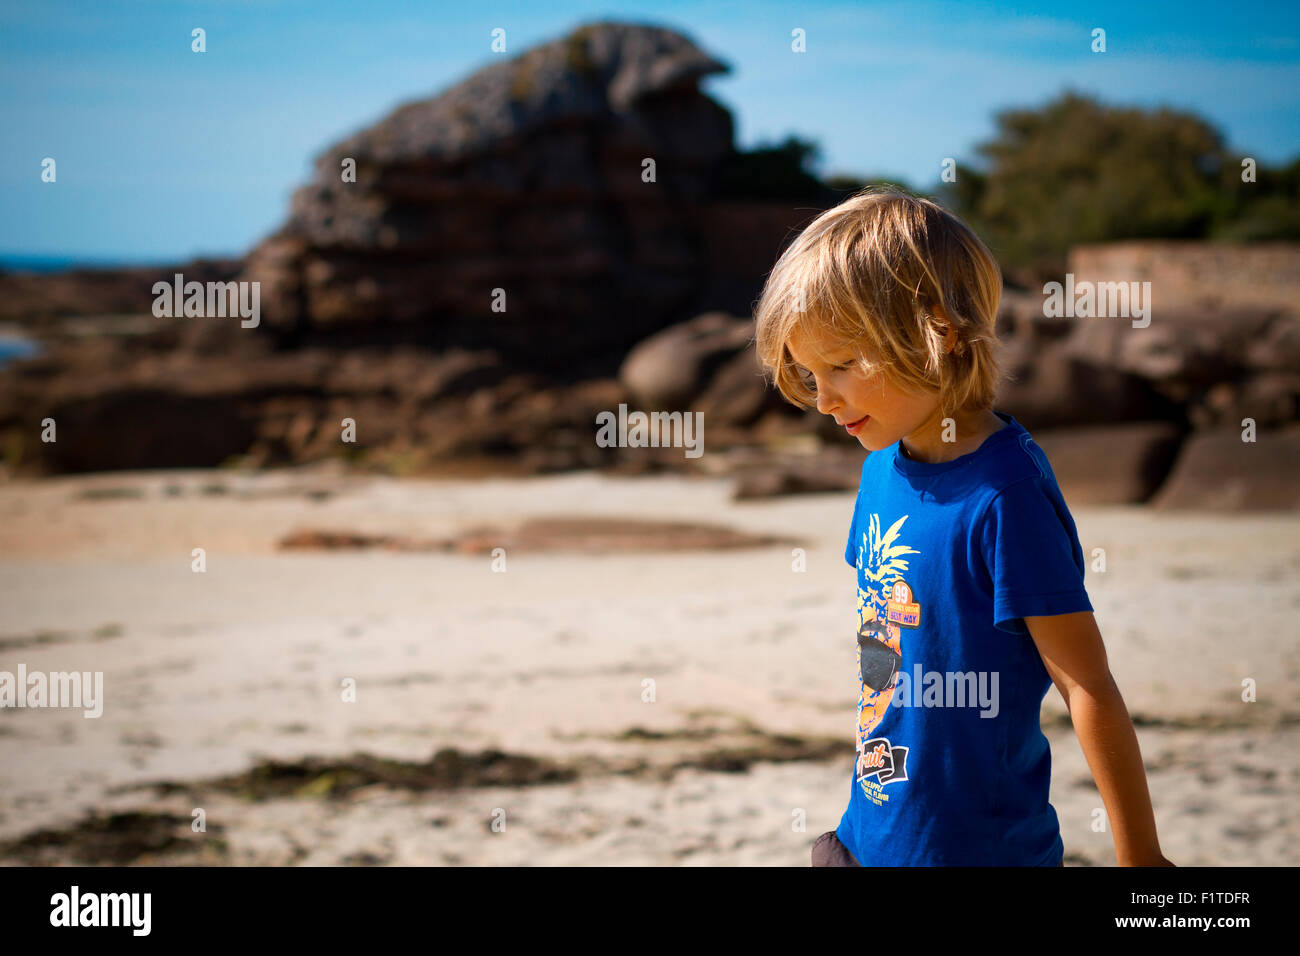 Young boy playing at the beach. Stock Photo